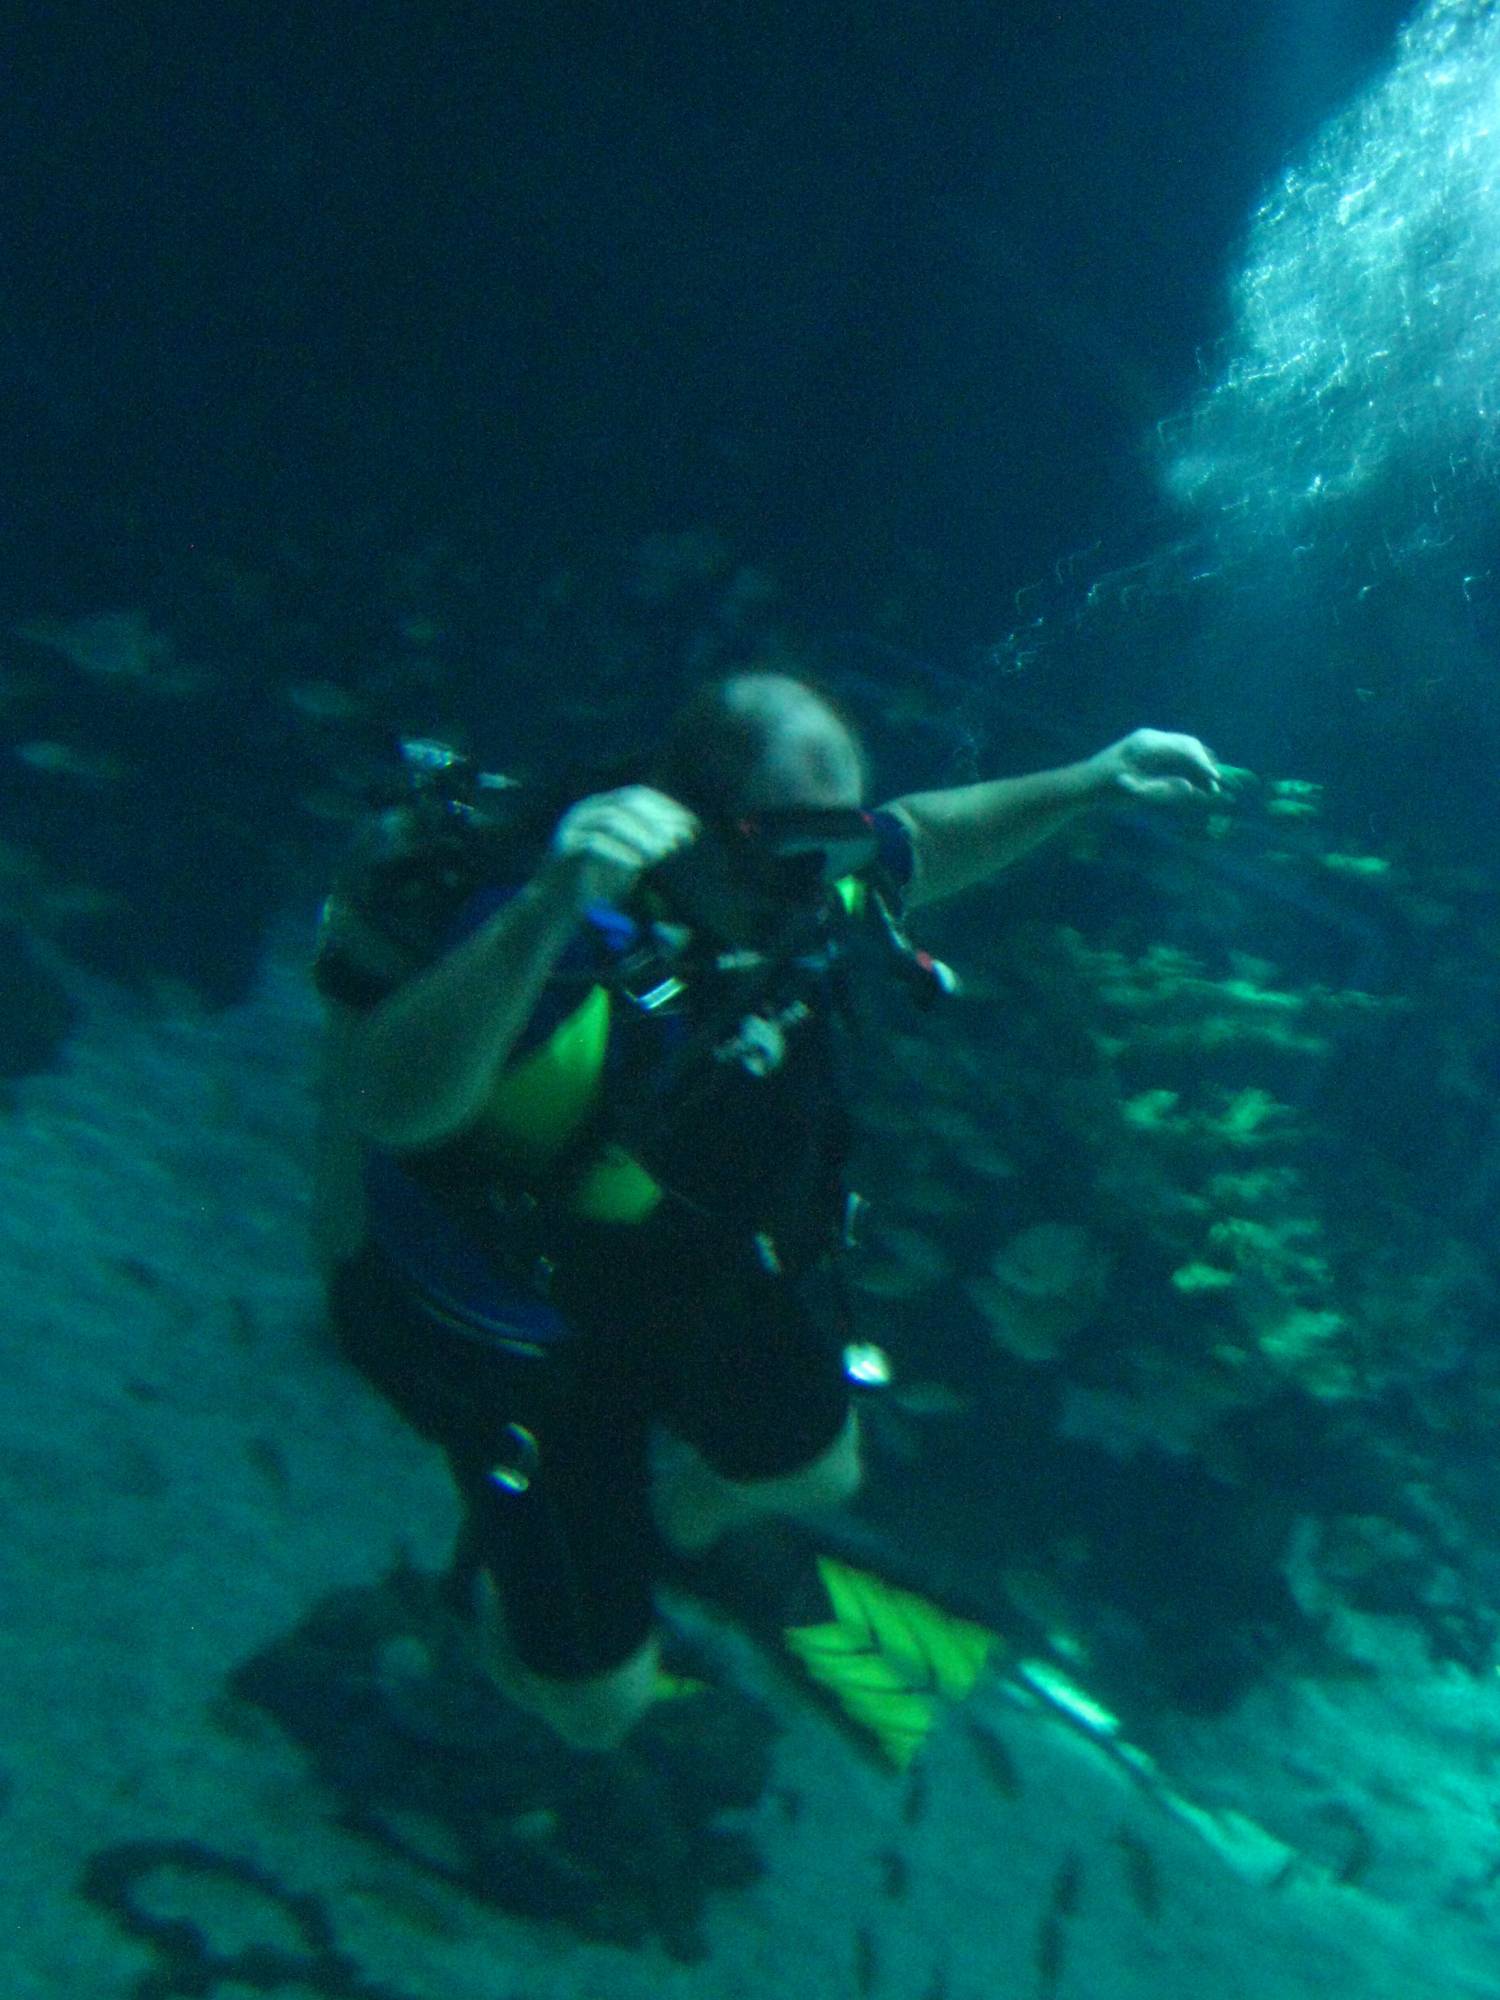 Lee diving at The Seas, EPCOT